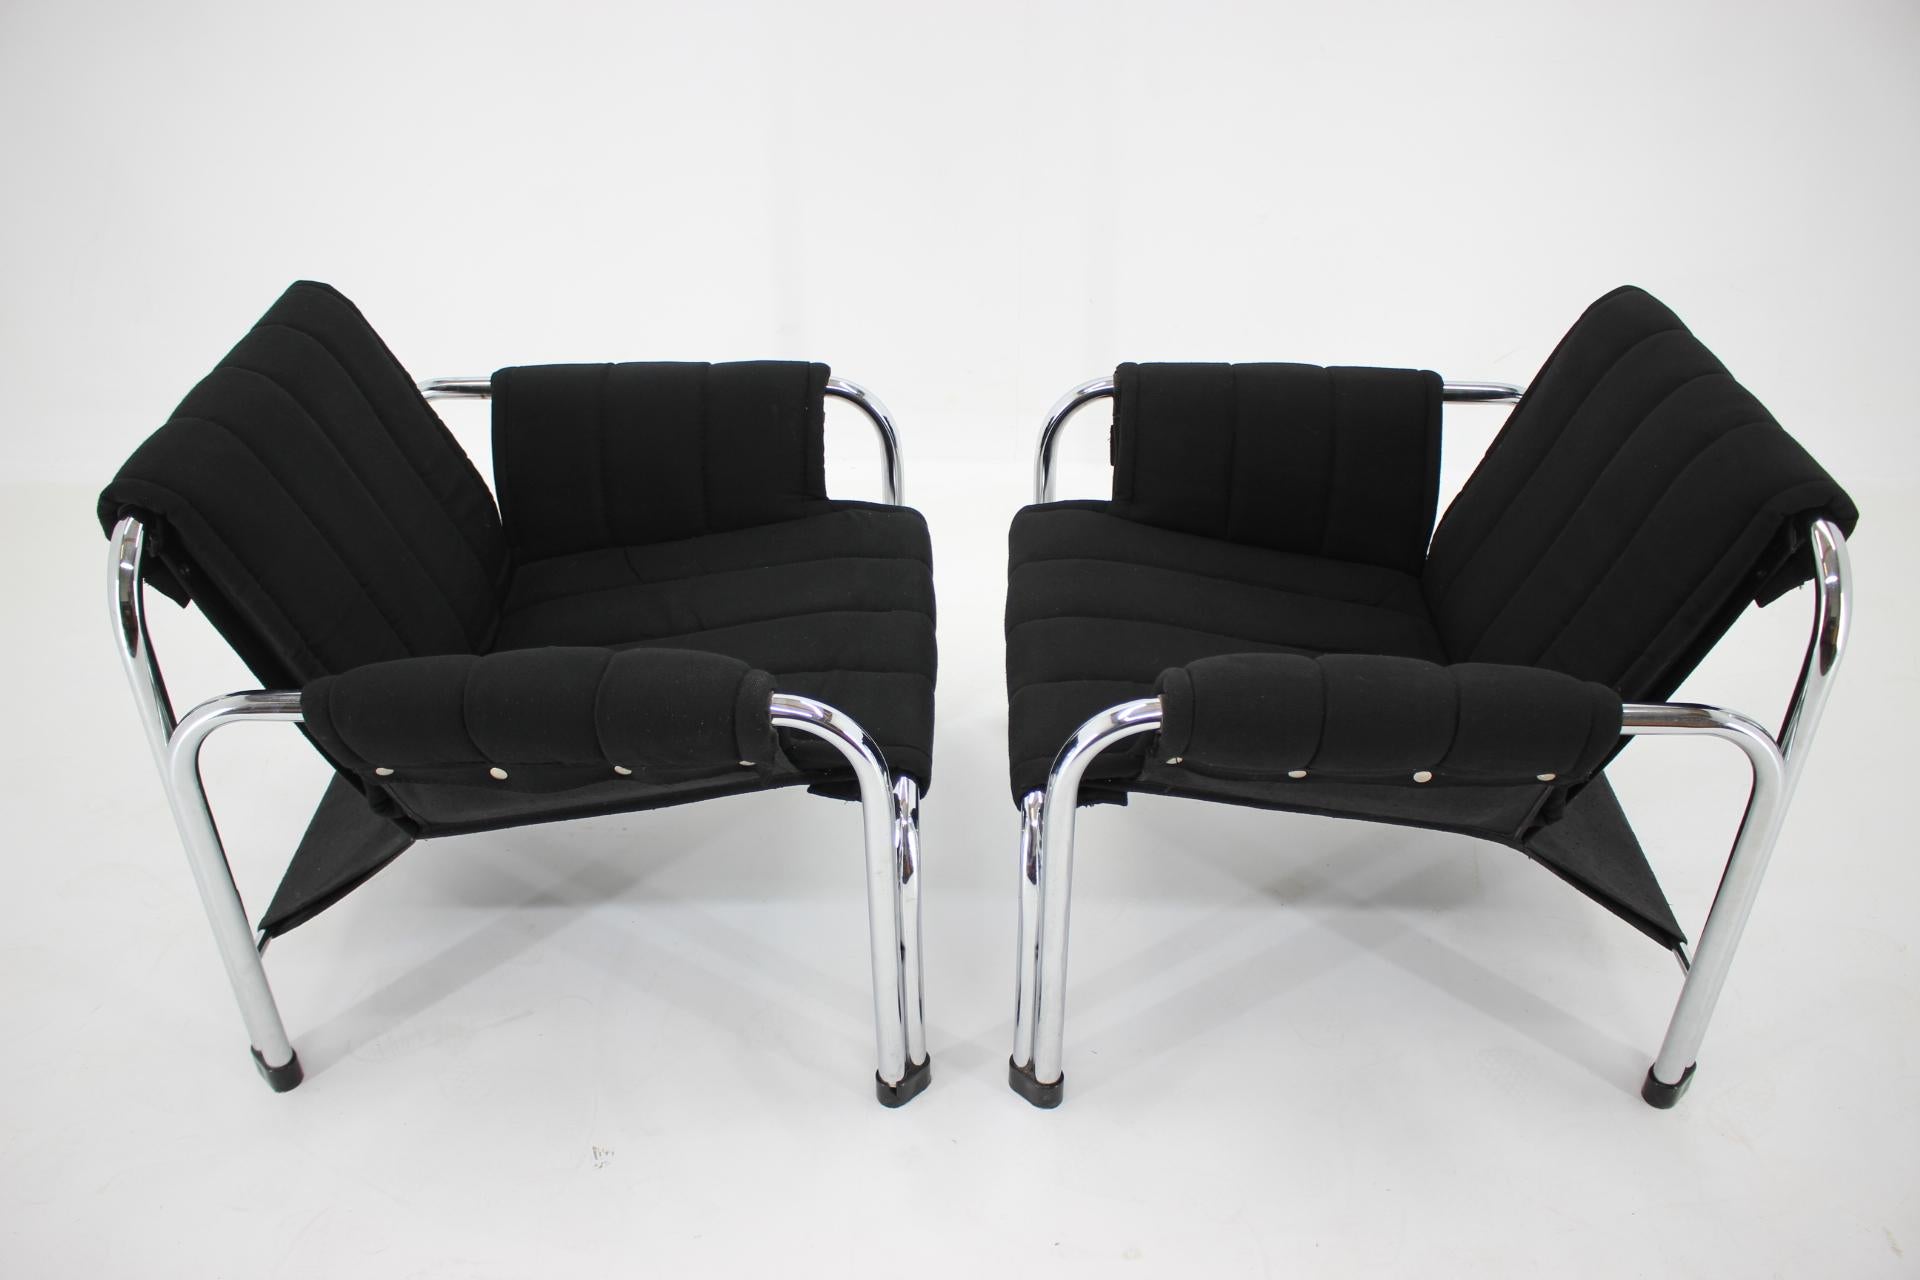 Late 20th Century Pair of Design Chrome Armchairs by Viliam Chlebo, Czechoslovakia/up to 16 pieces For Sale